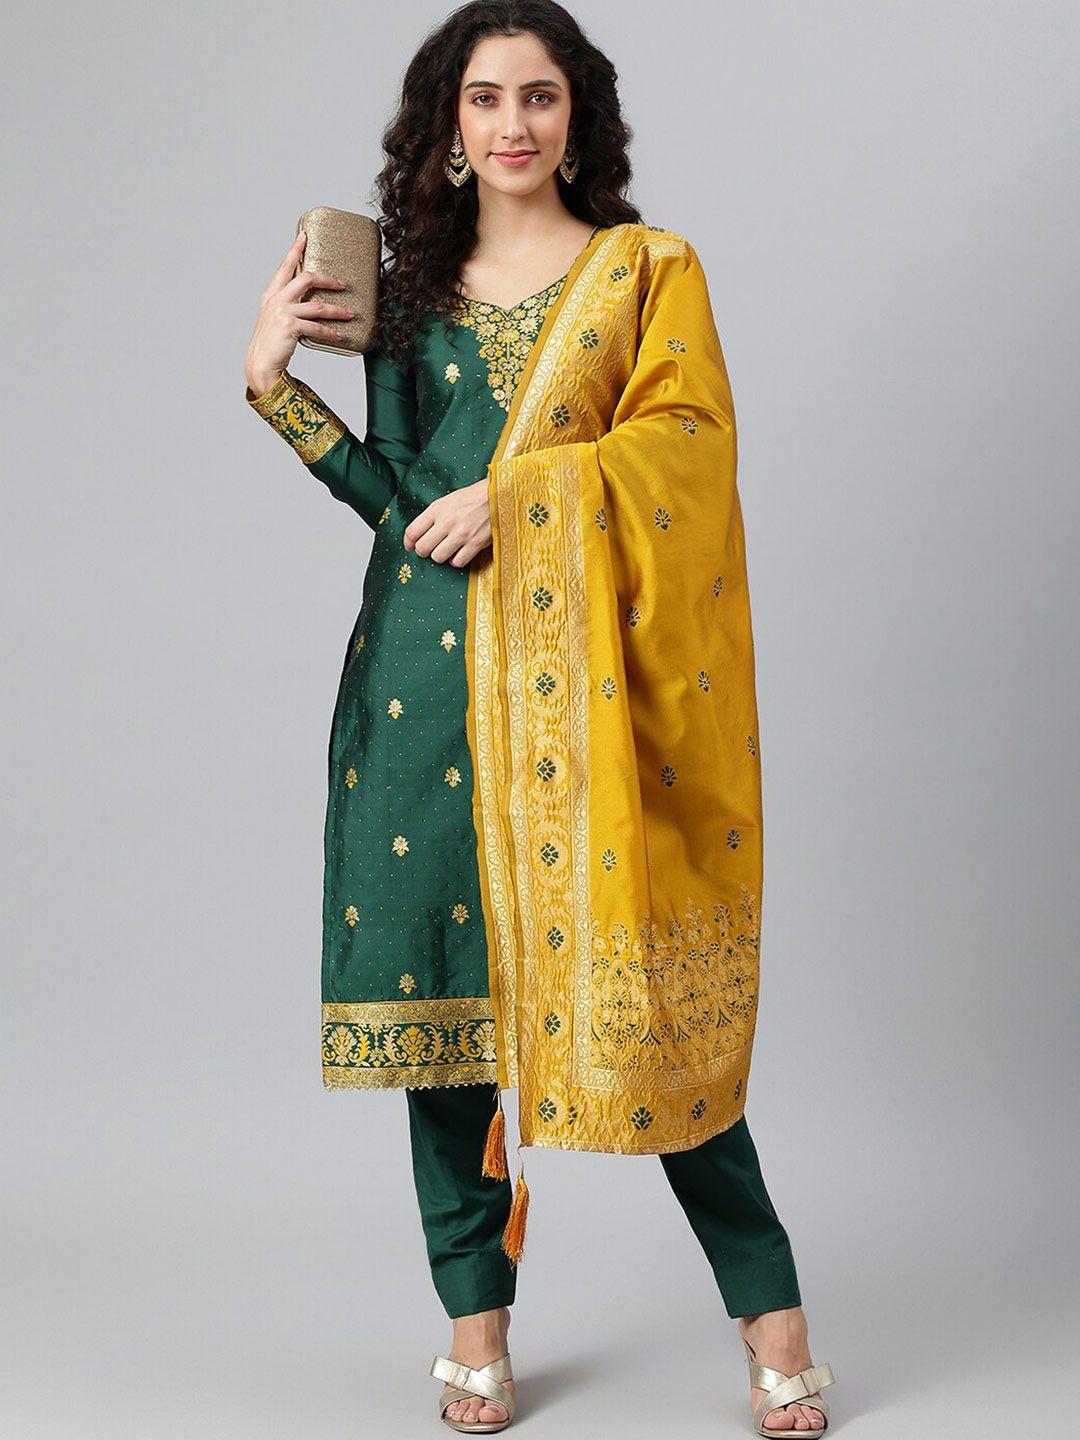 lilots-green-&-gold-toned-unstitched-dress-material